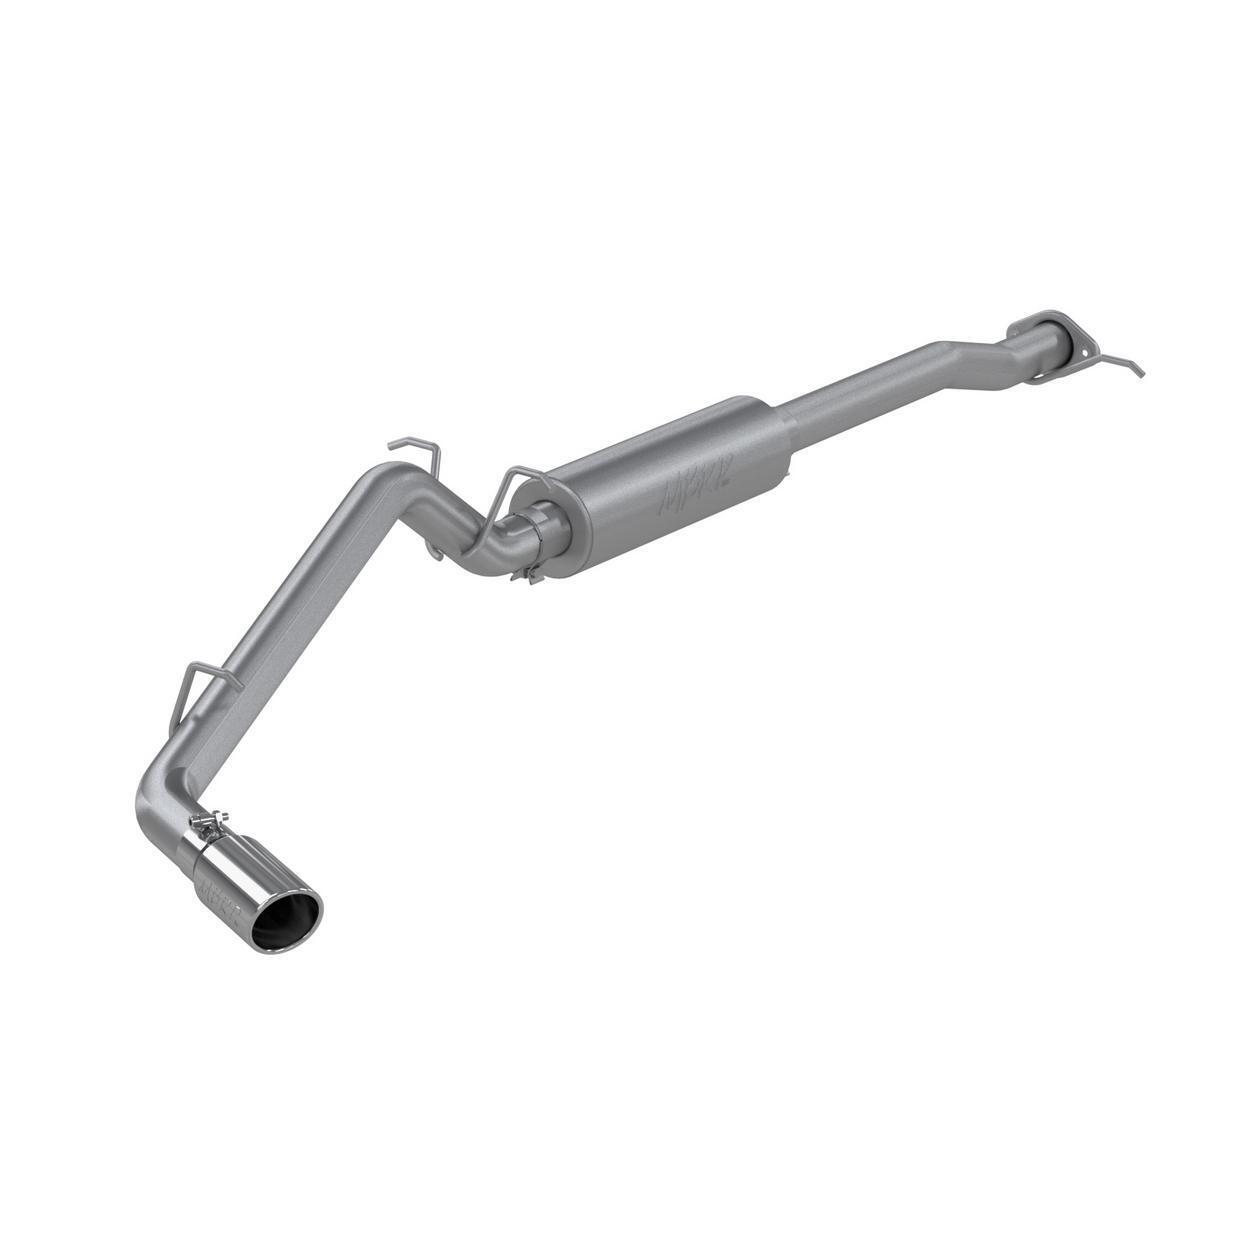 MBRP S5090304-WR Exhaust System Kit Fits 2019 GMC Canyon SLT